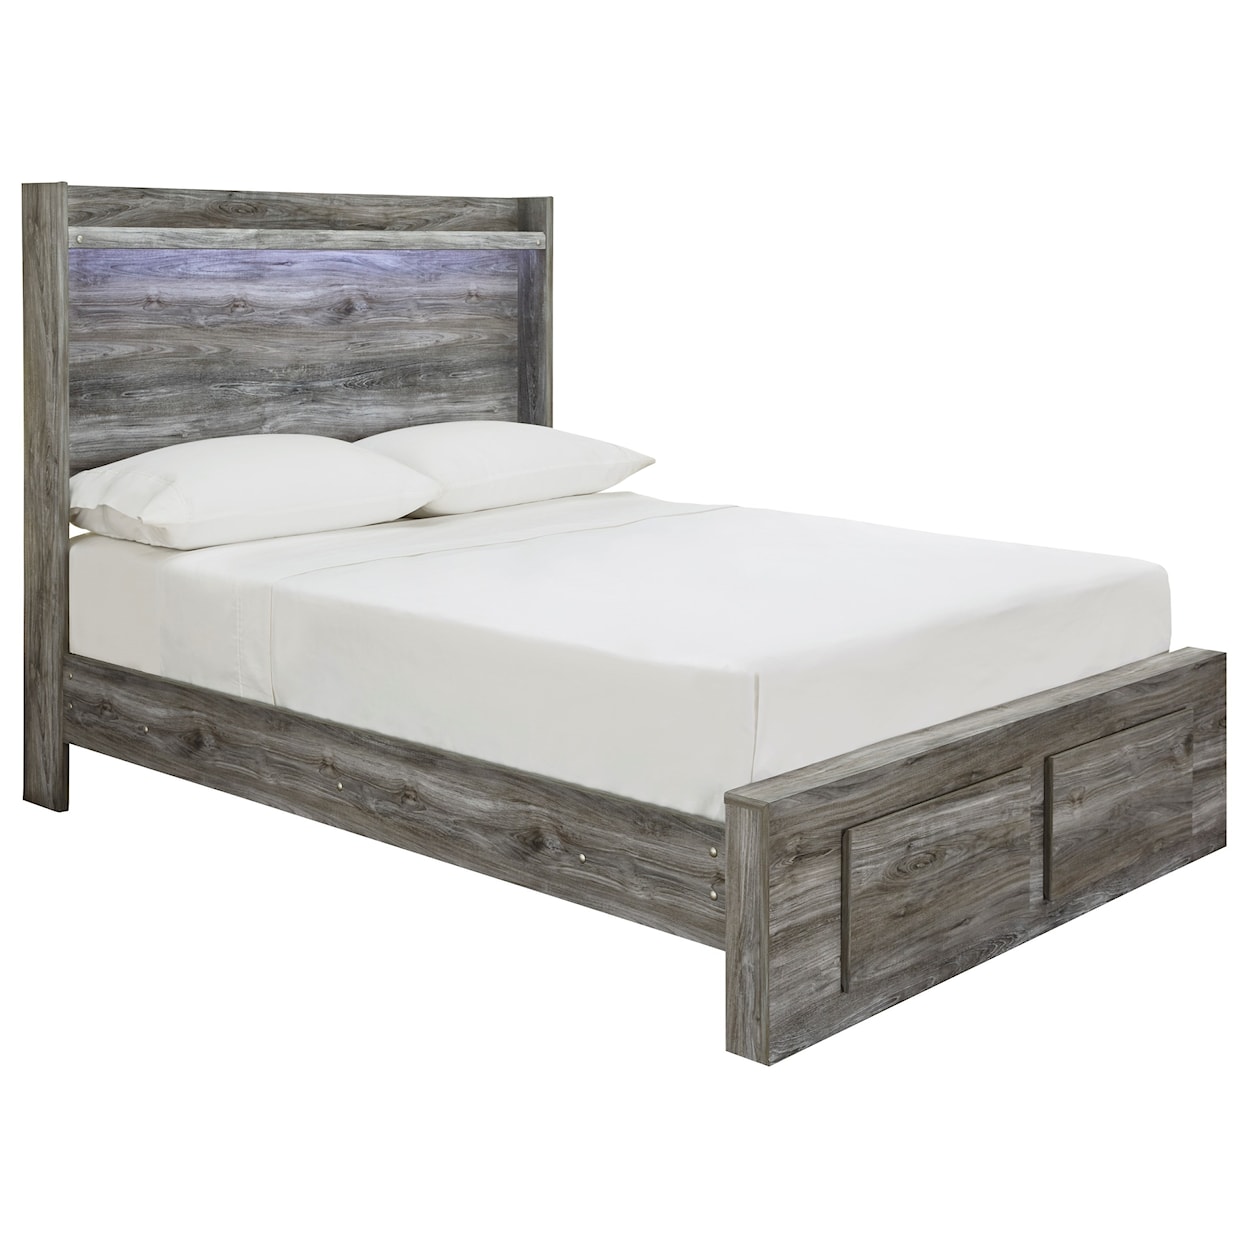 Signature Design by Ashley Baystorm Full Storage Bed